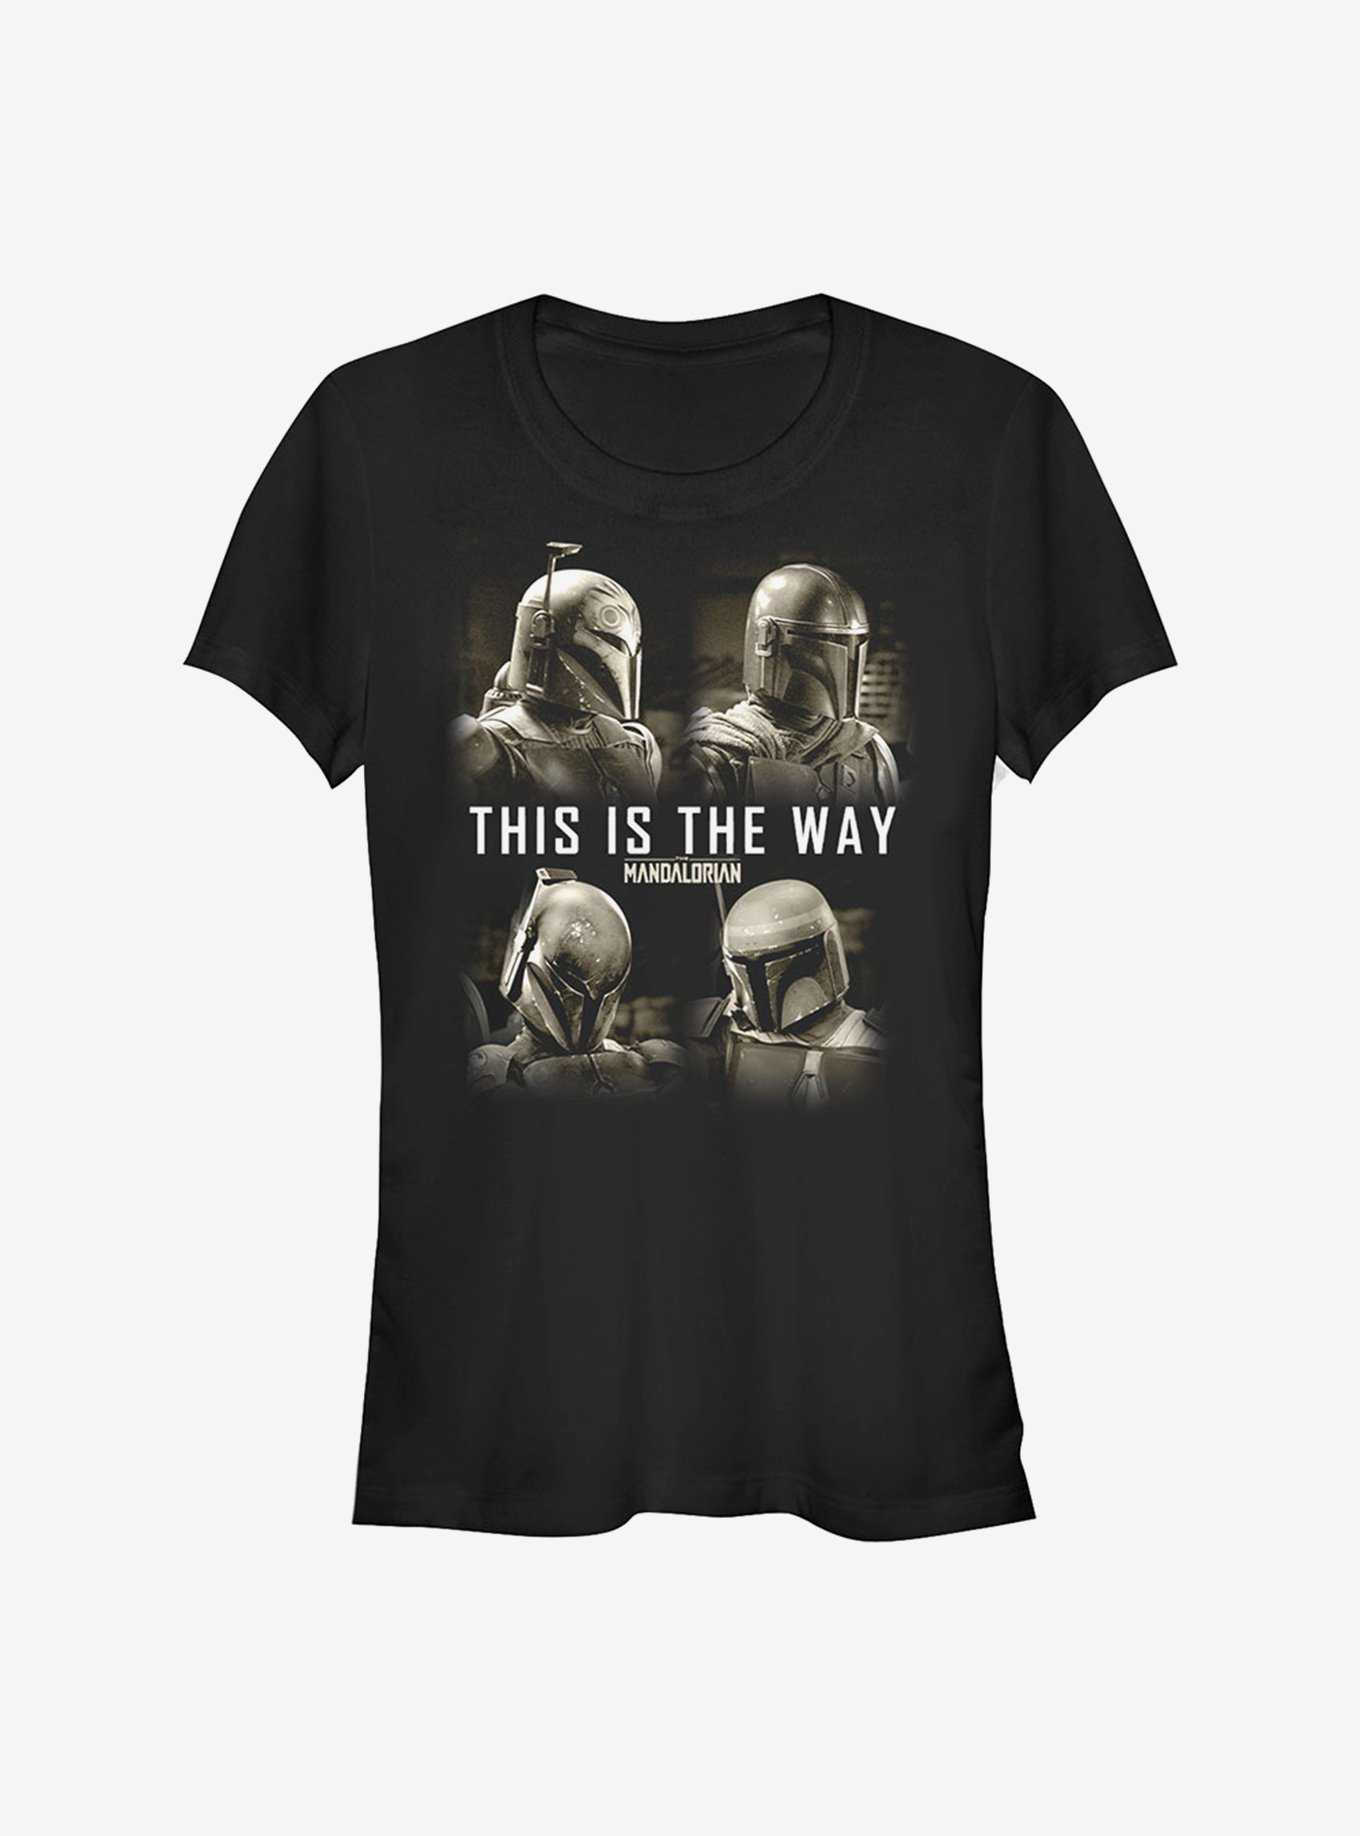 Star Wars The Mandalorian This Is The Way Girls T-Shirt, , hi-res